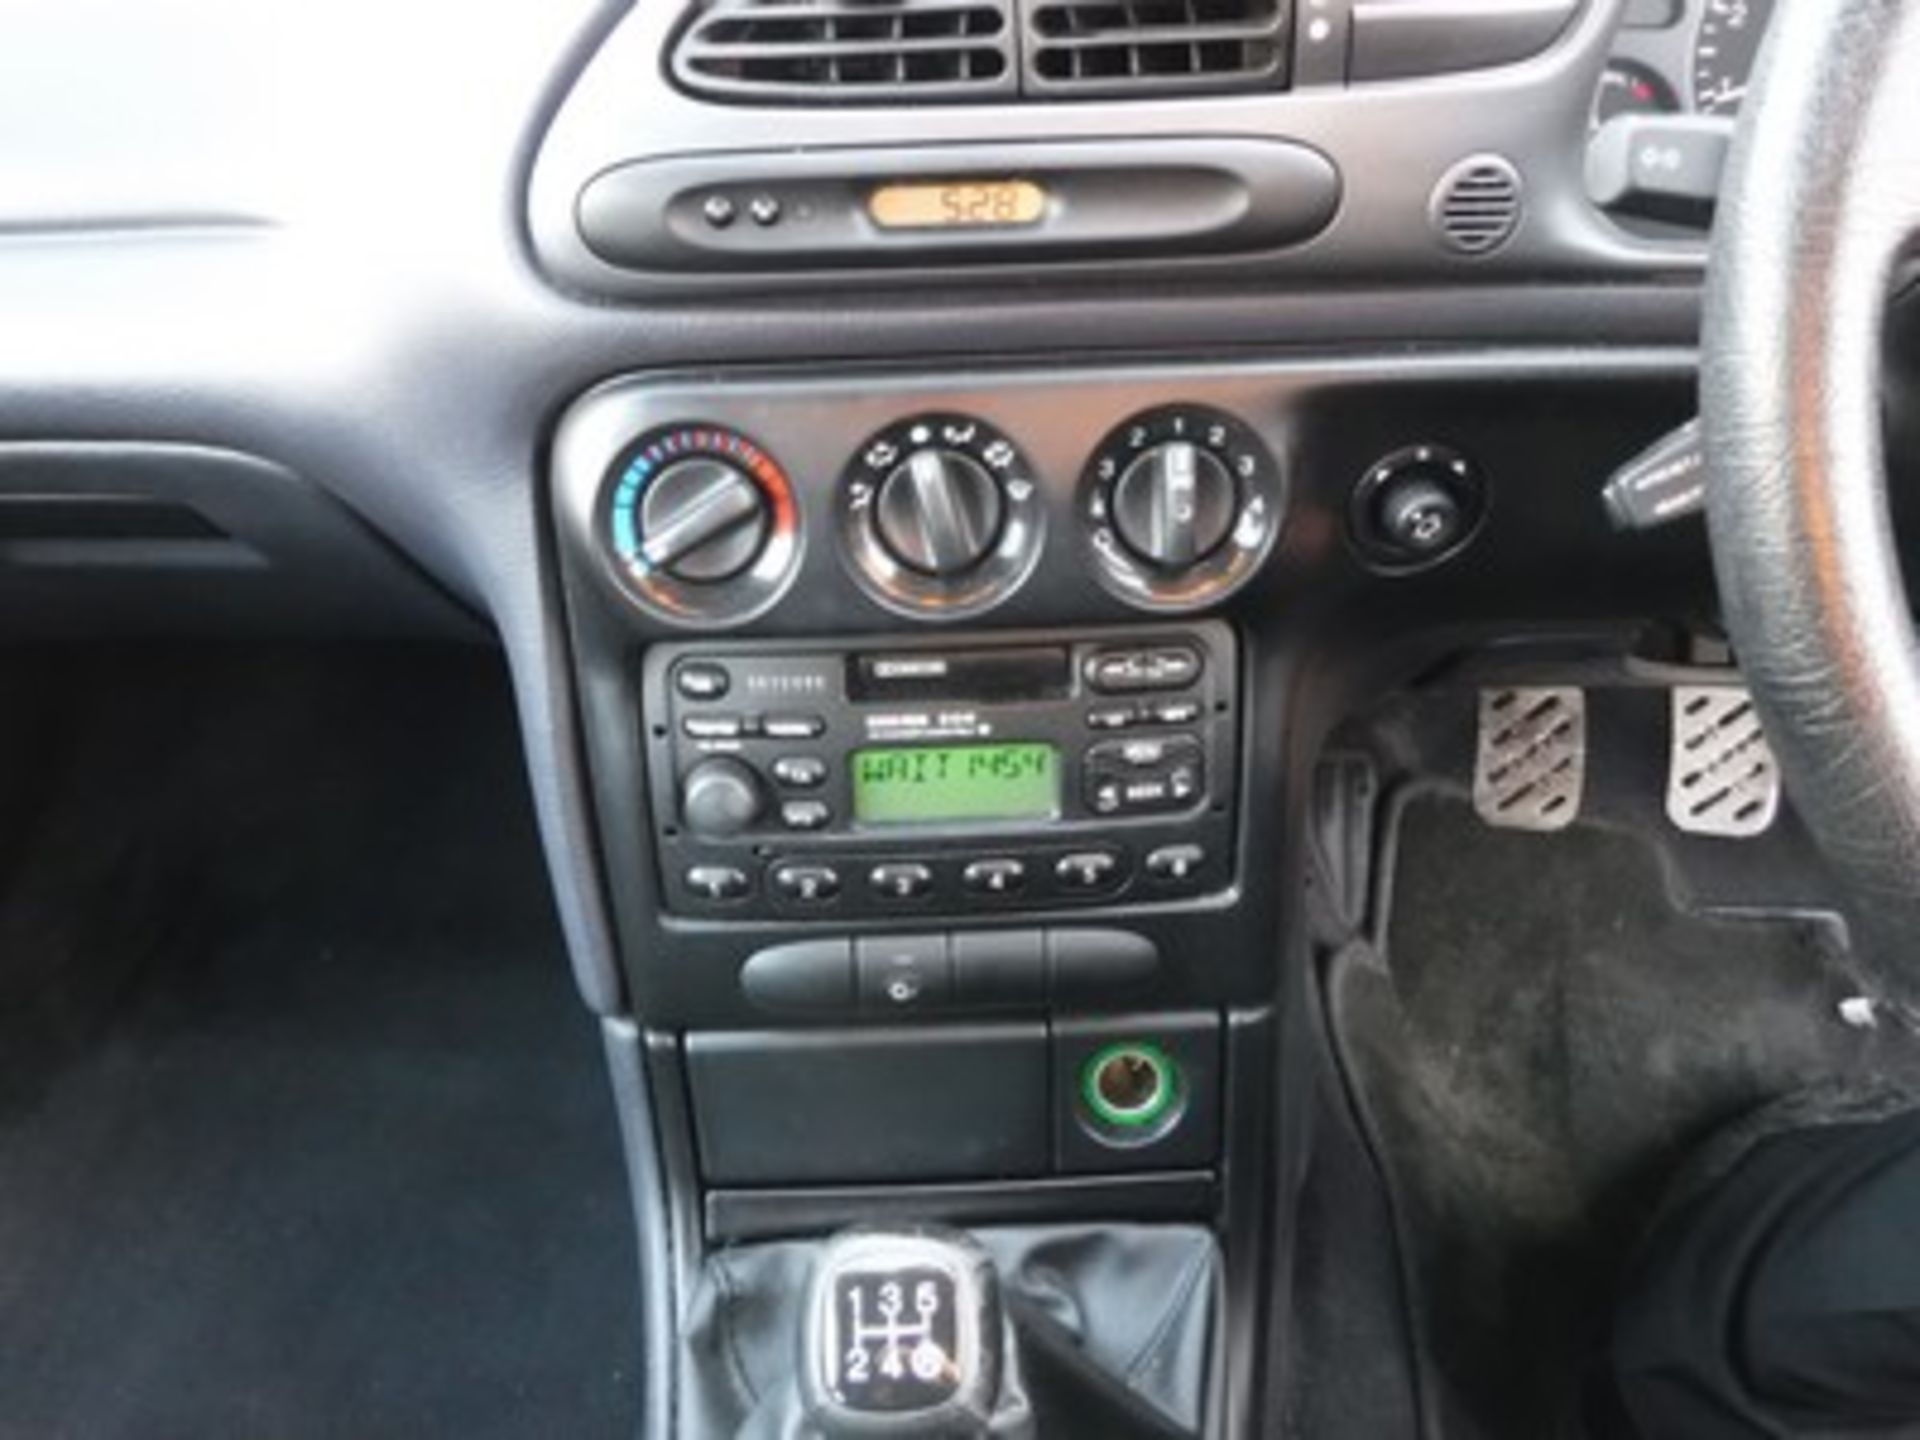 FORD MONDEO ST 24 V6 - 2497cc - Image 12 of 12